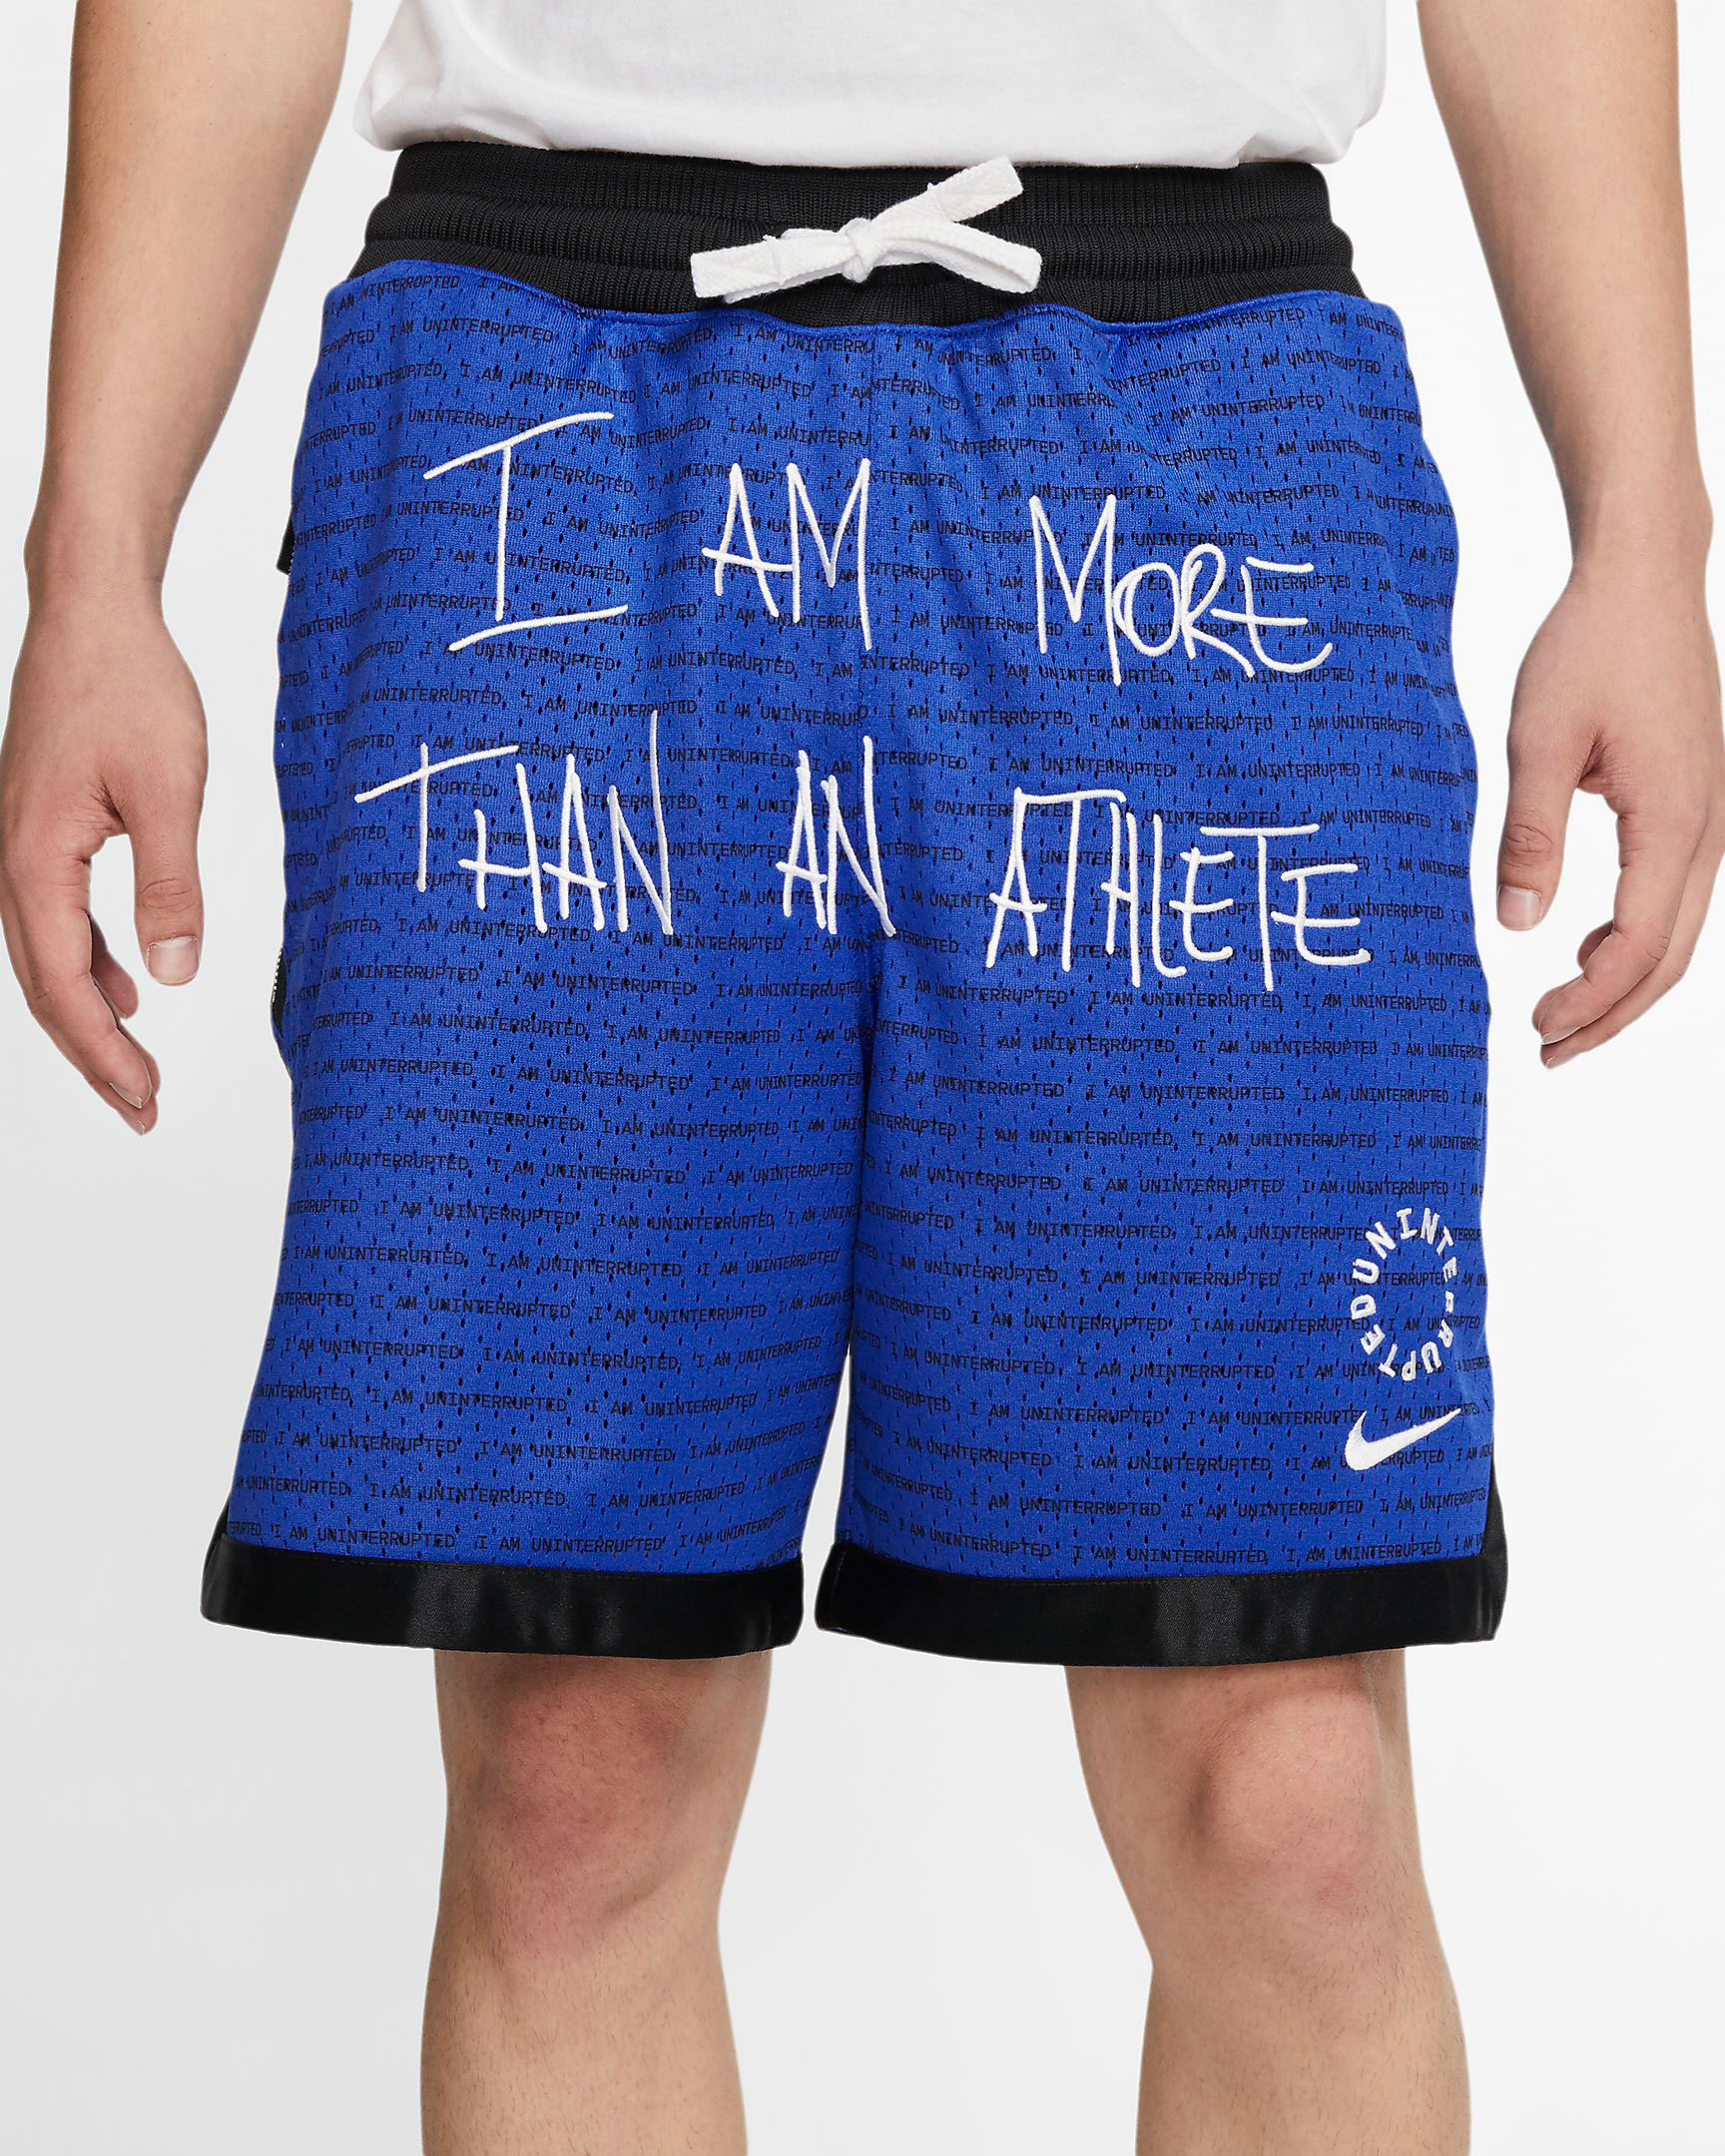 more than an athlete shorts